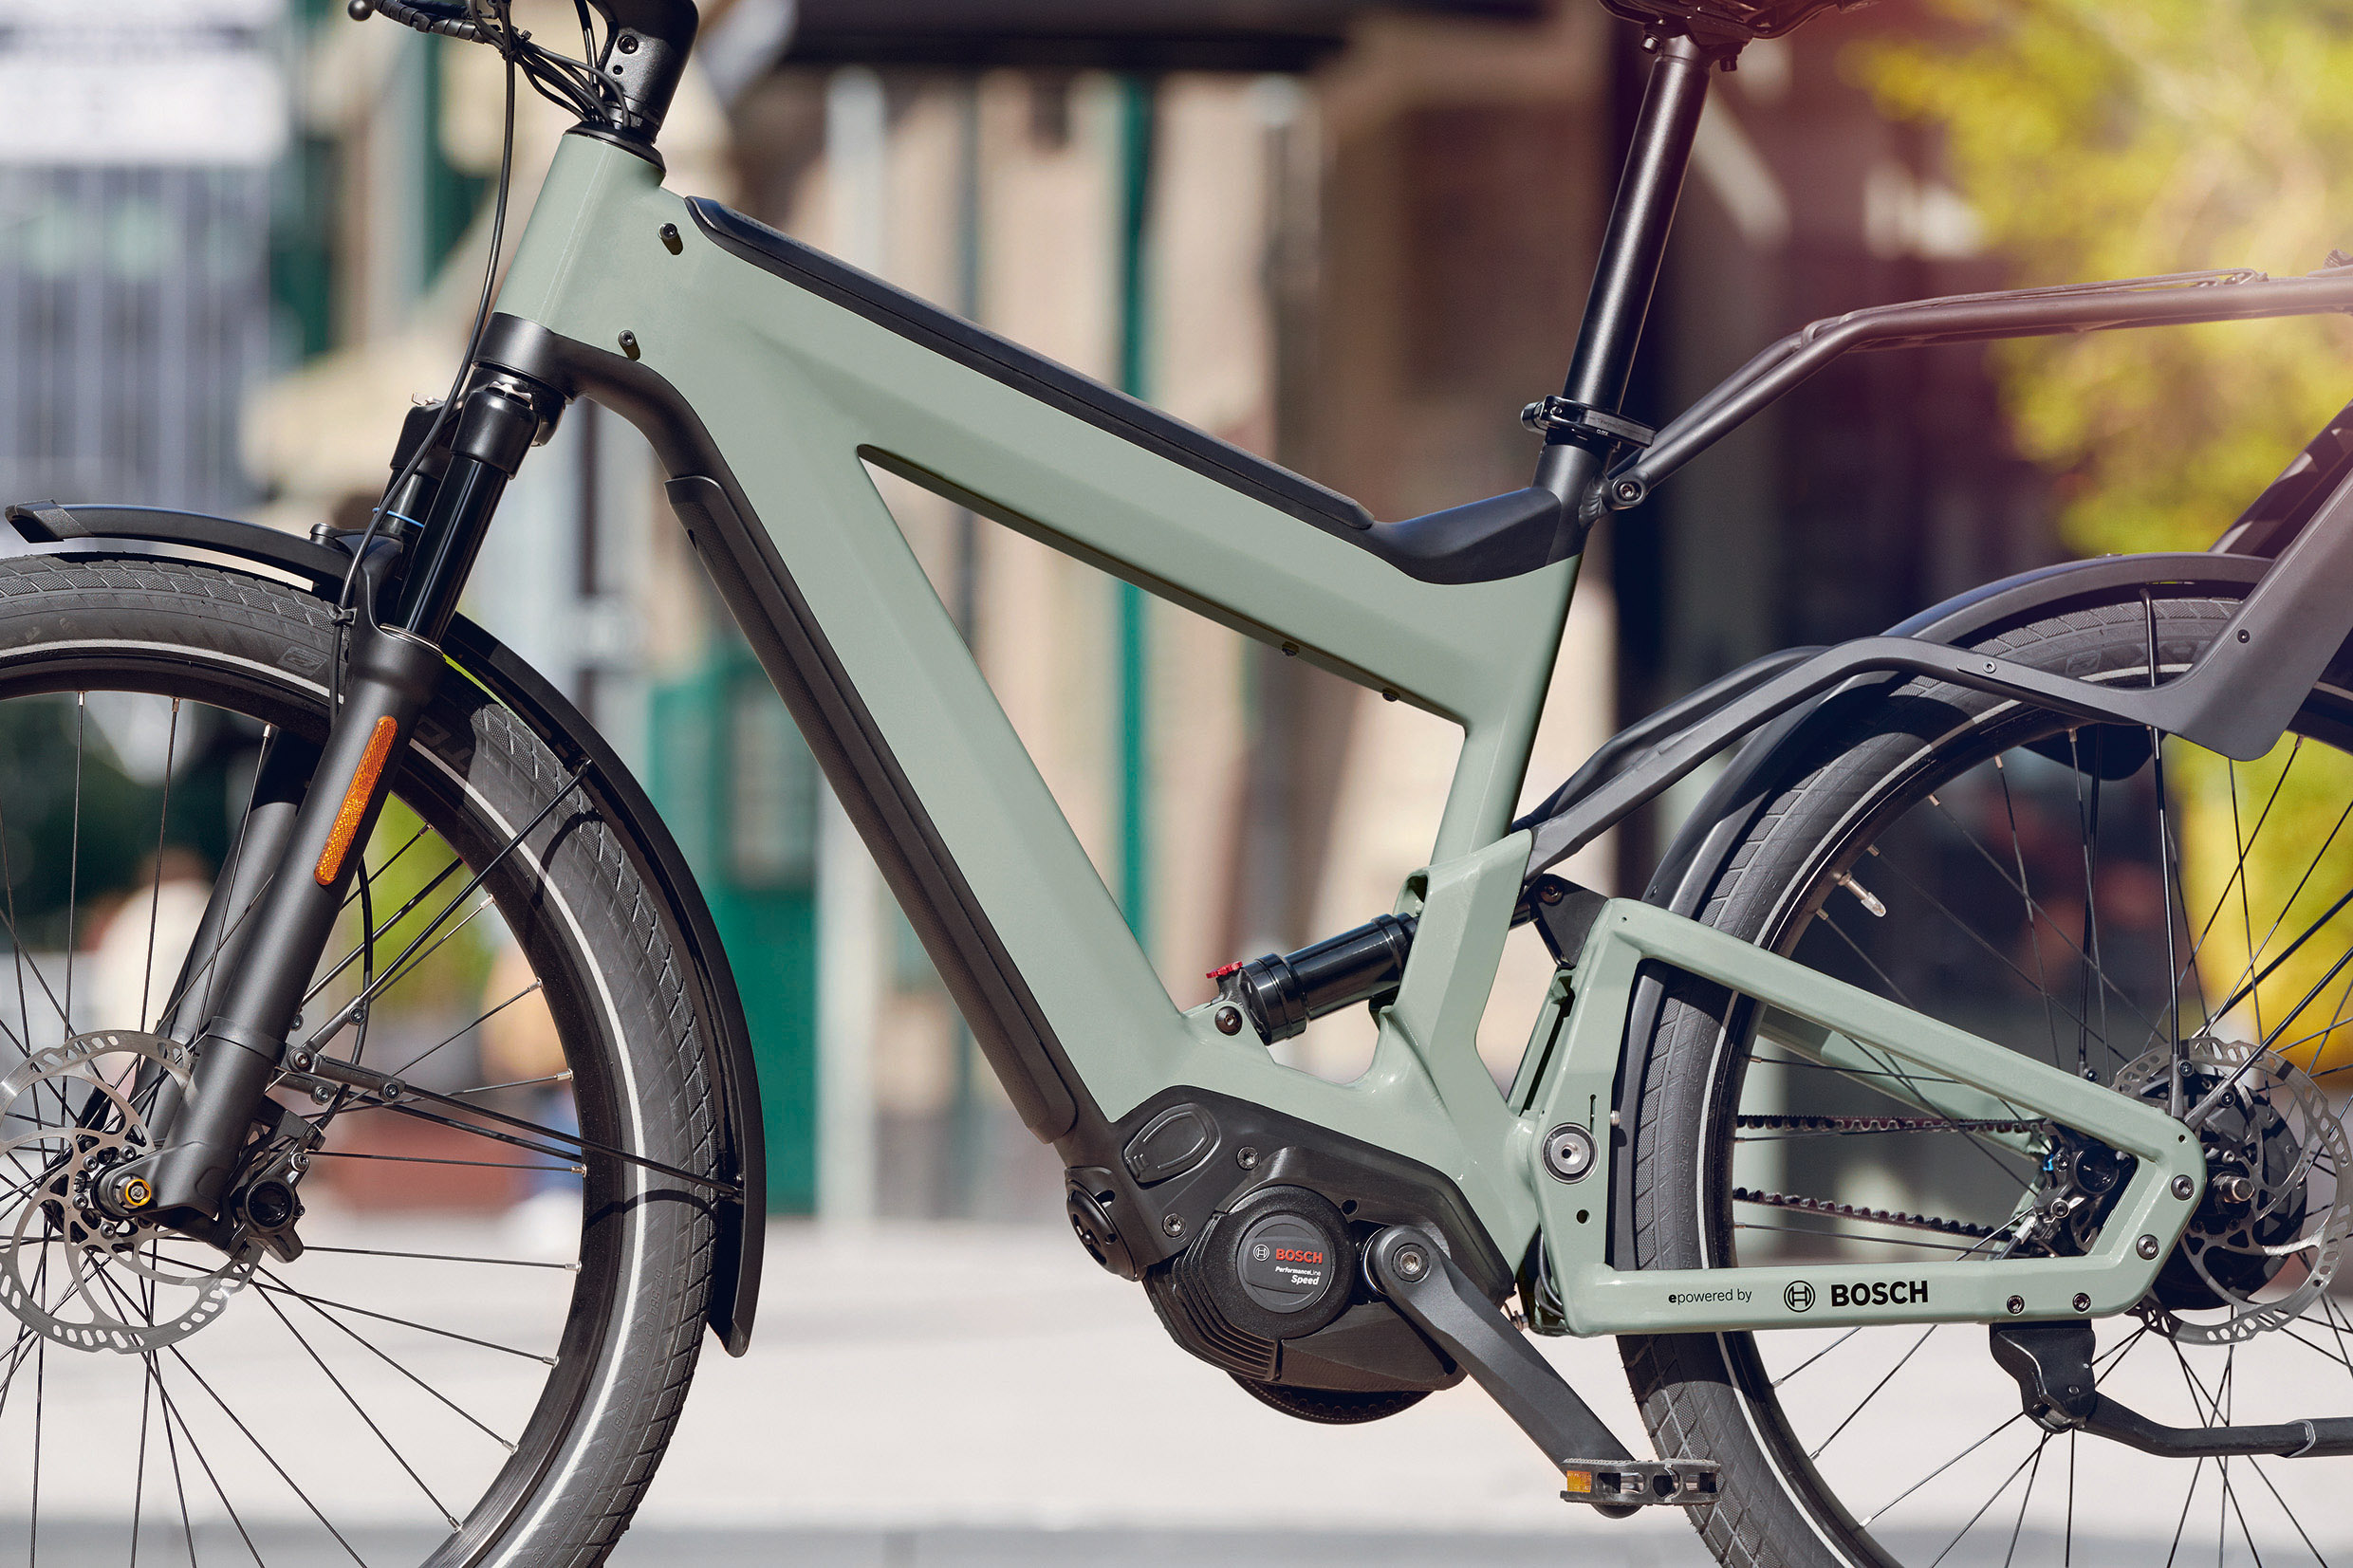 Bosch Ebike Systems New Products By 2020 Bosch Media Service